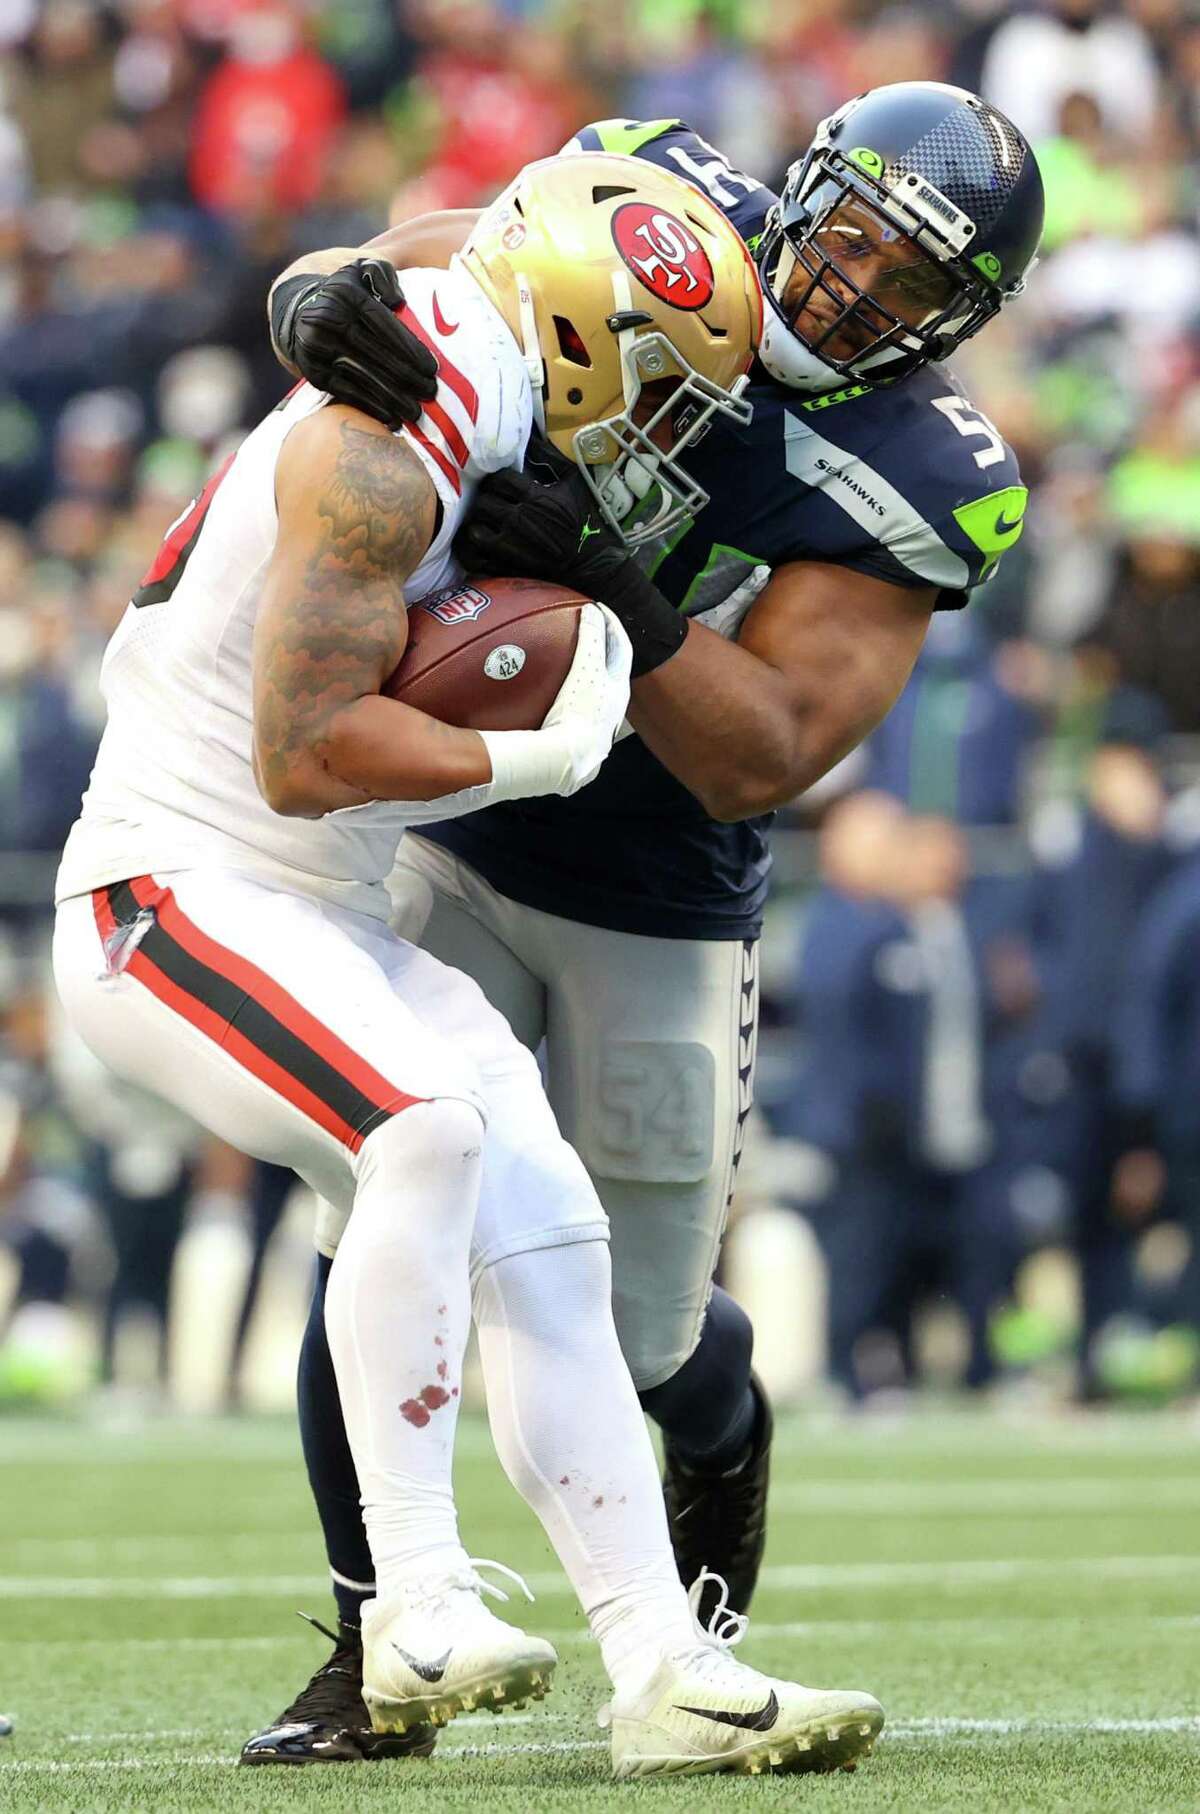 SEATTLE, WASHINGTON - DECEMBER 05: Eli Mitchell #25 of the San Francisco 49ers is tackled by Bobby Wagner #54 of the Seattle Seahawks during the third quarter at Lumen Field on December 05, 2021 in Seattle, Washington. (Photo by Abbie Parr/Getty Images)